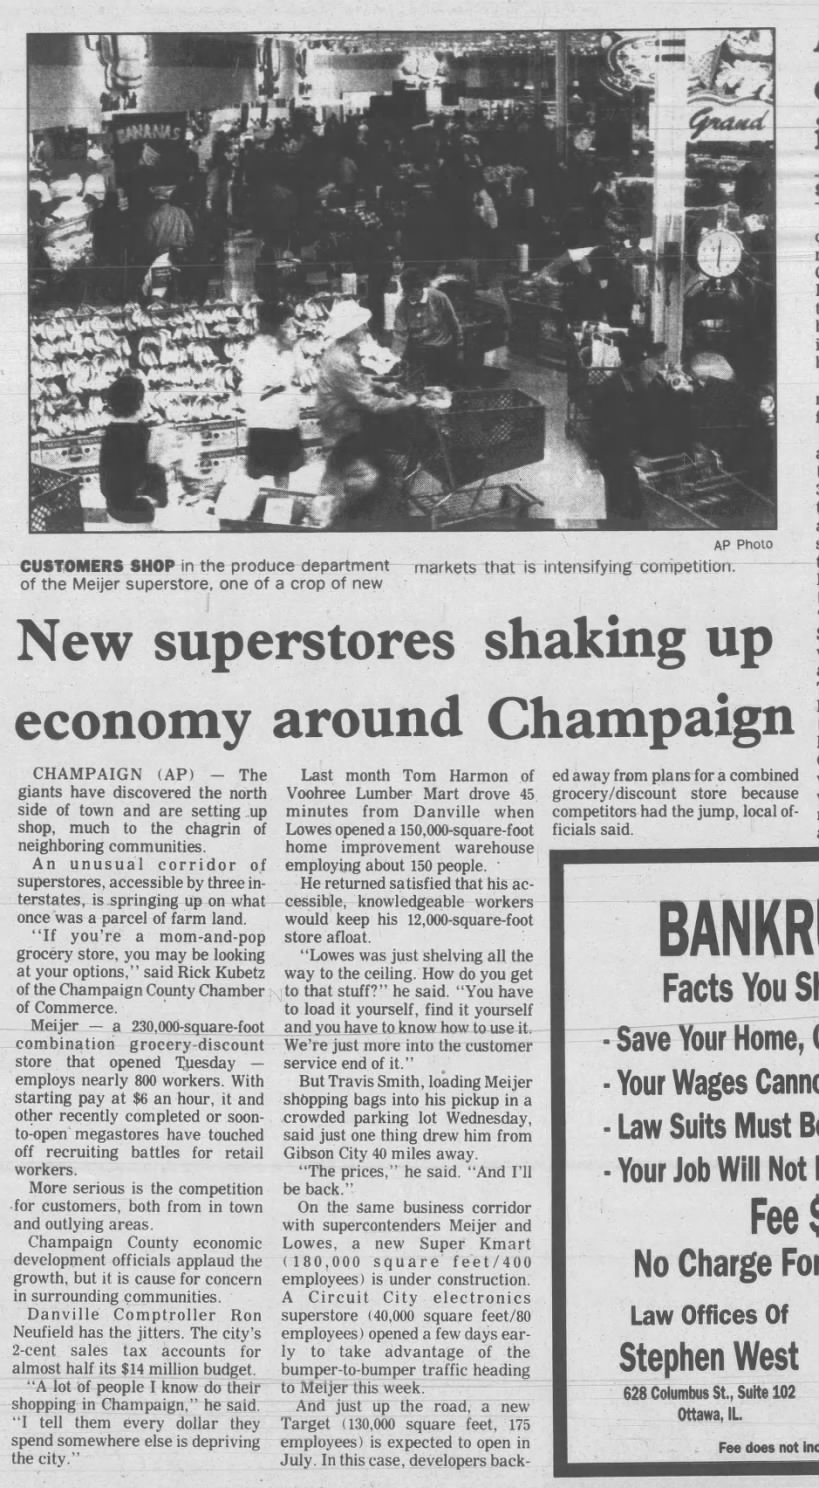 New superstores shaking up economy around Champaign